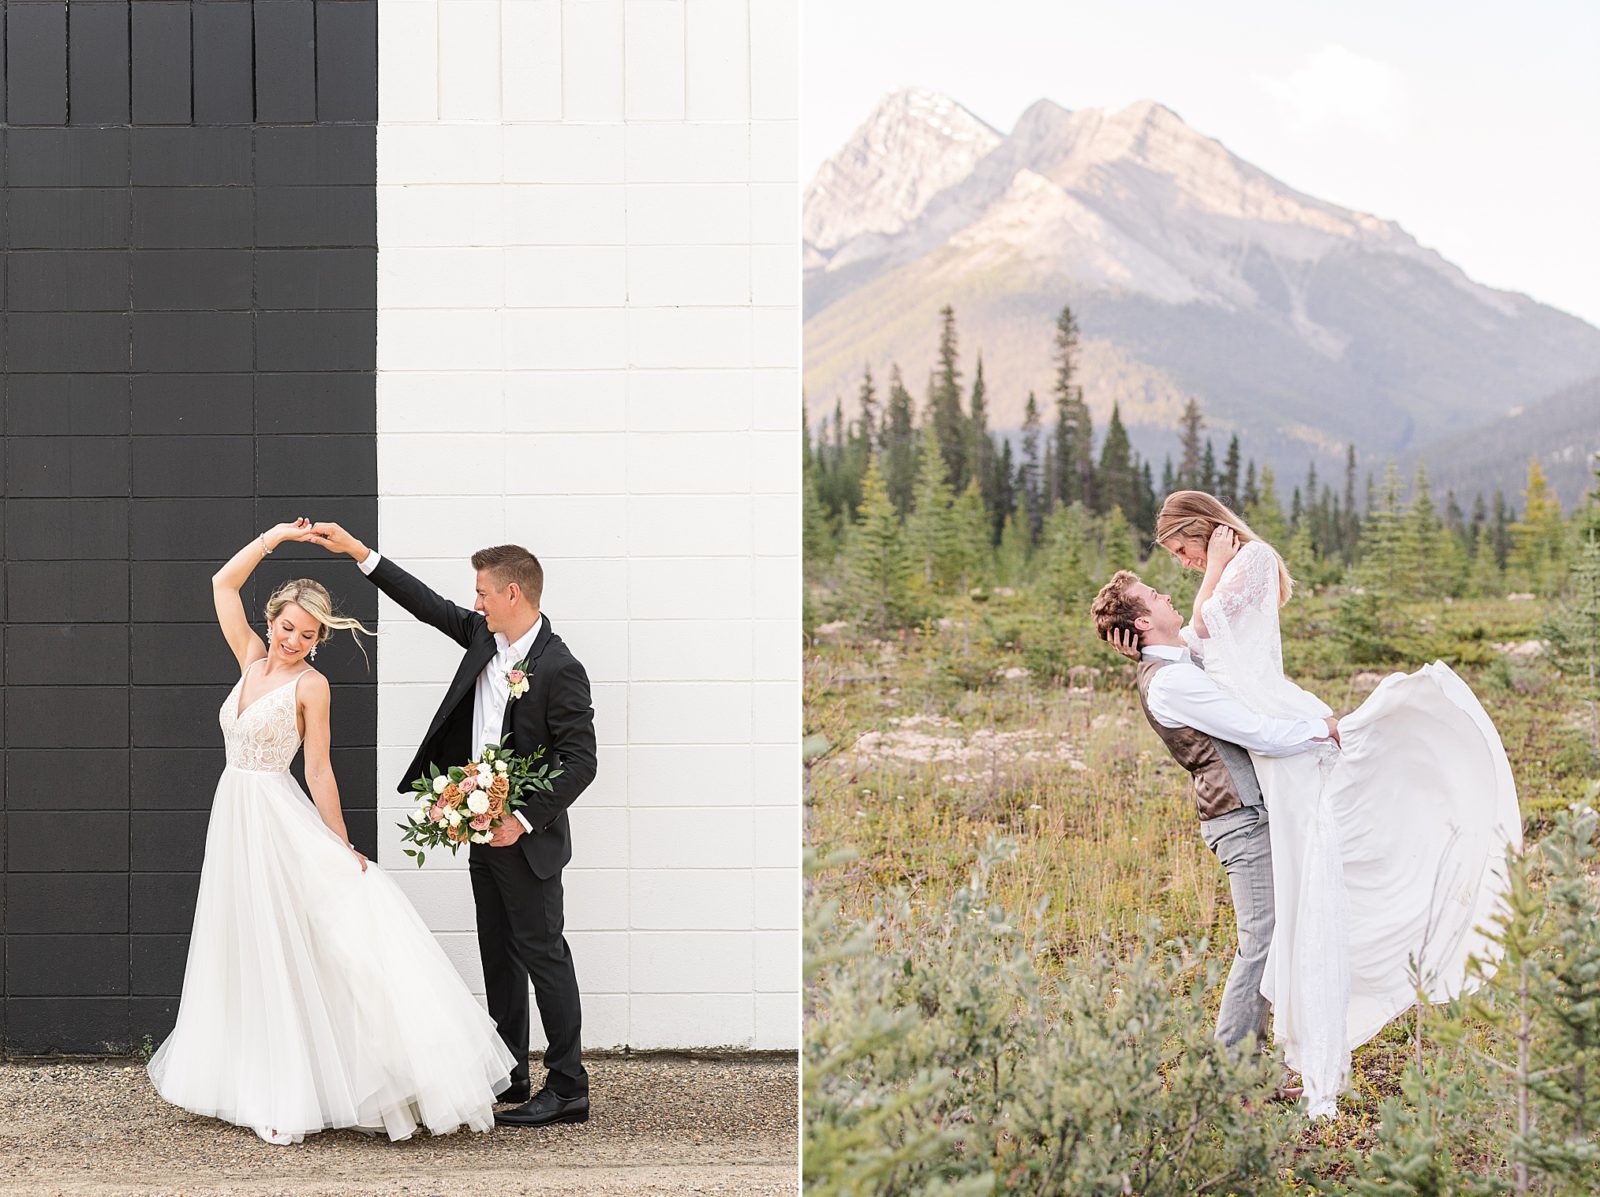 Wedding couple in front of a black and white wall, and wedding couple in the mountains after engagement